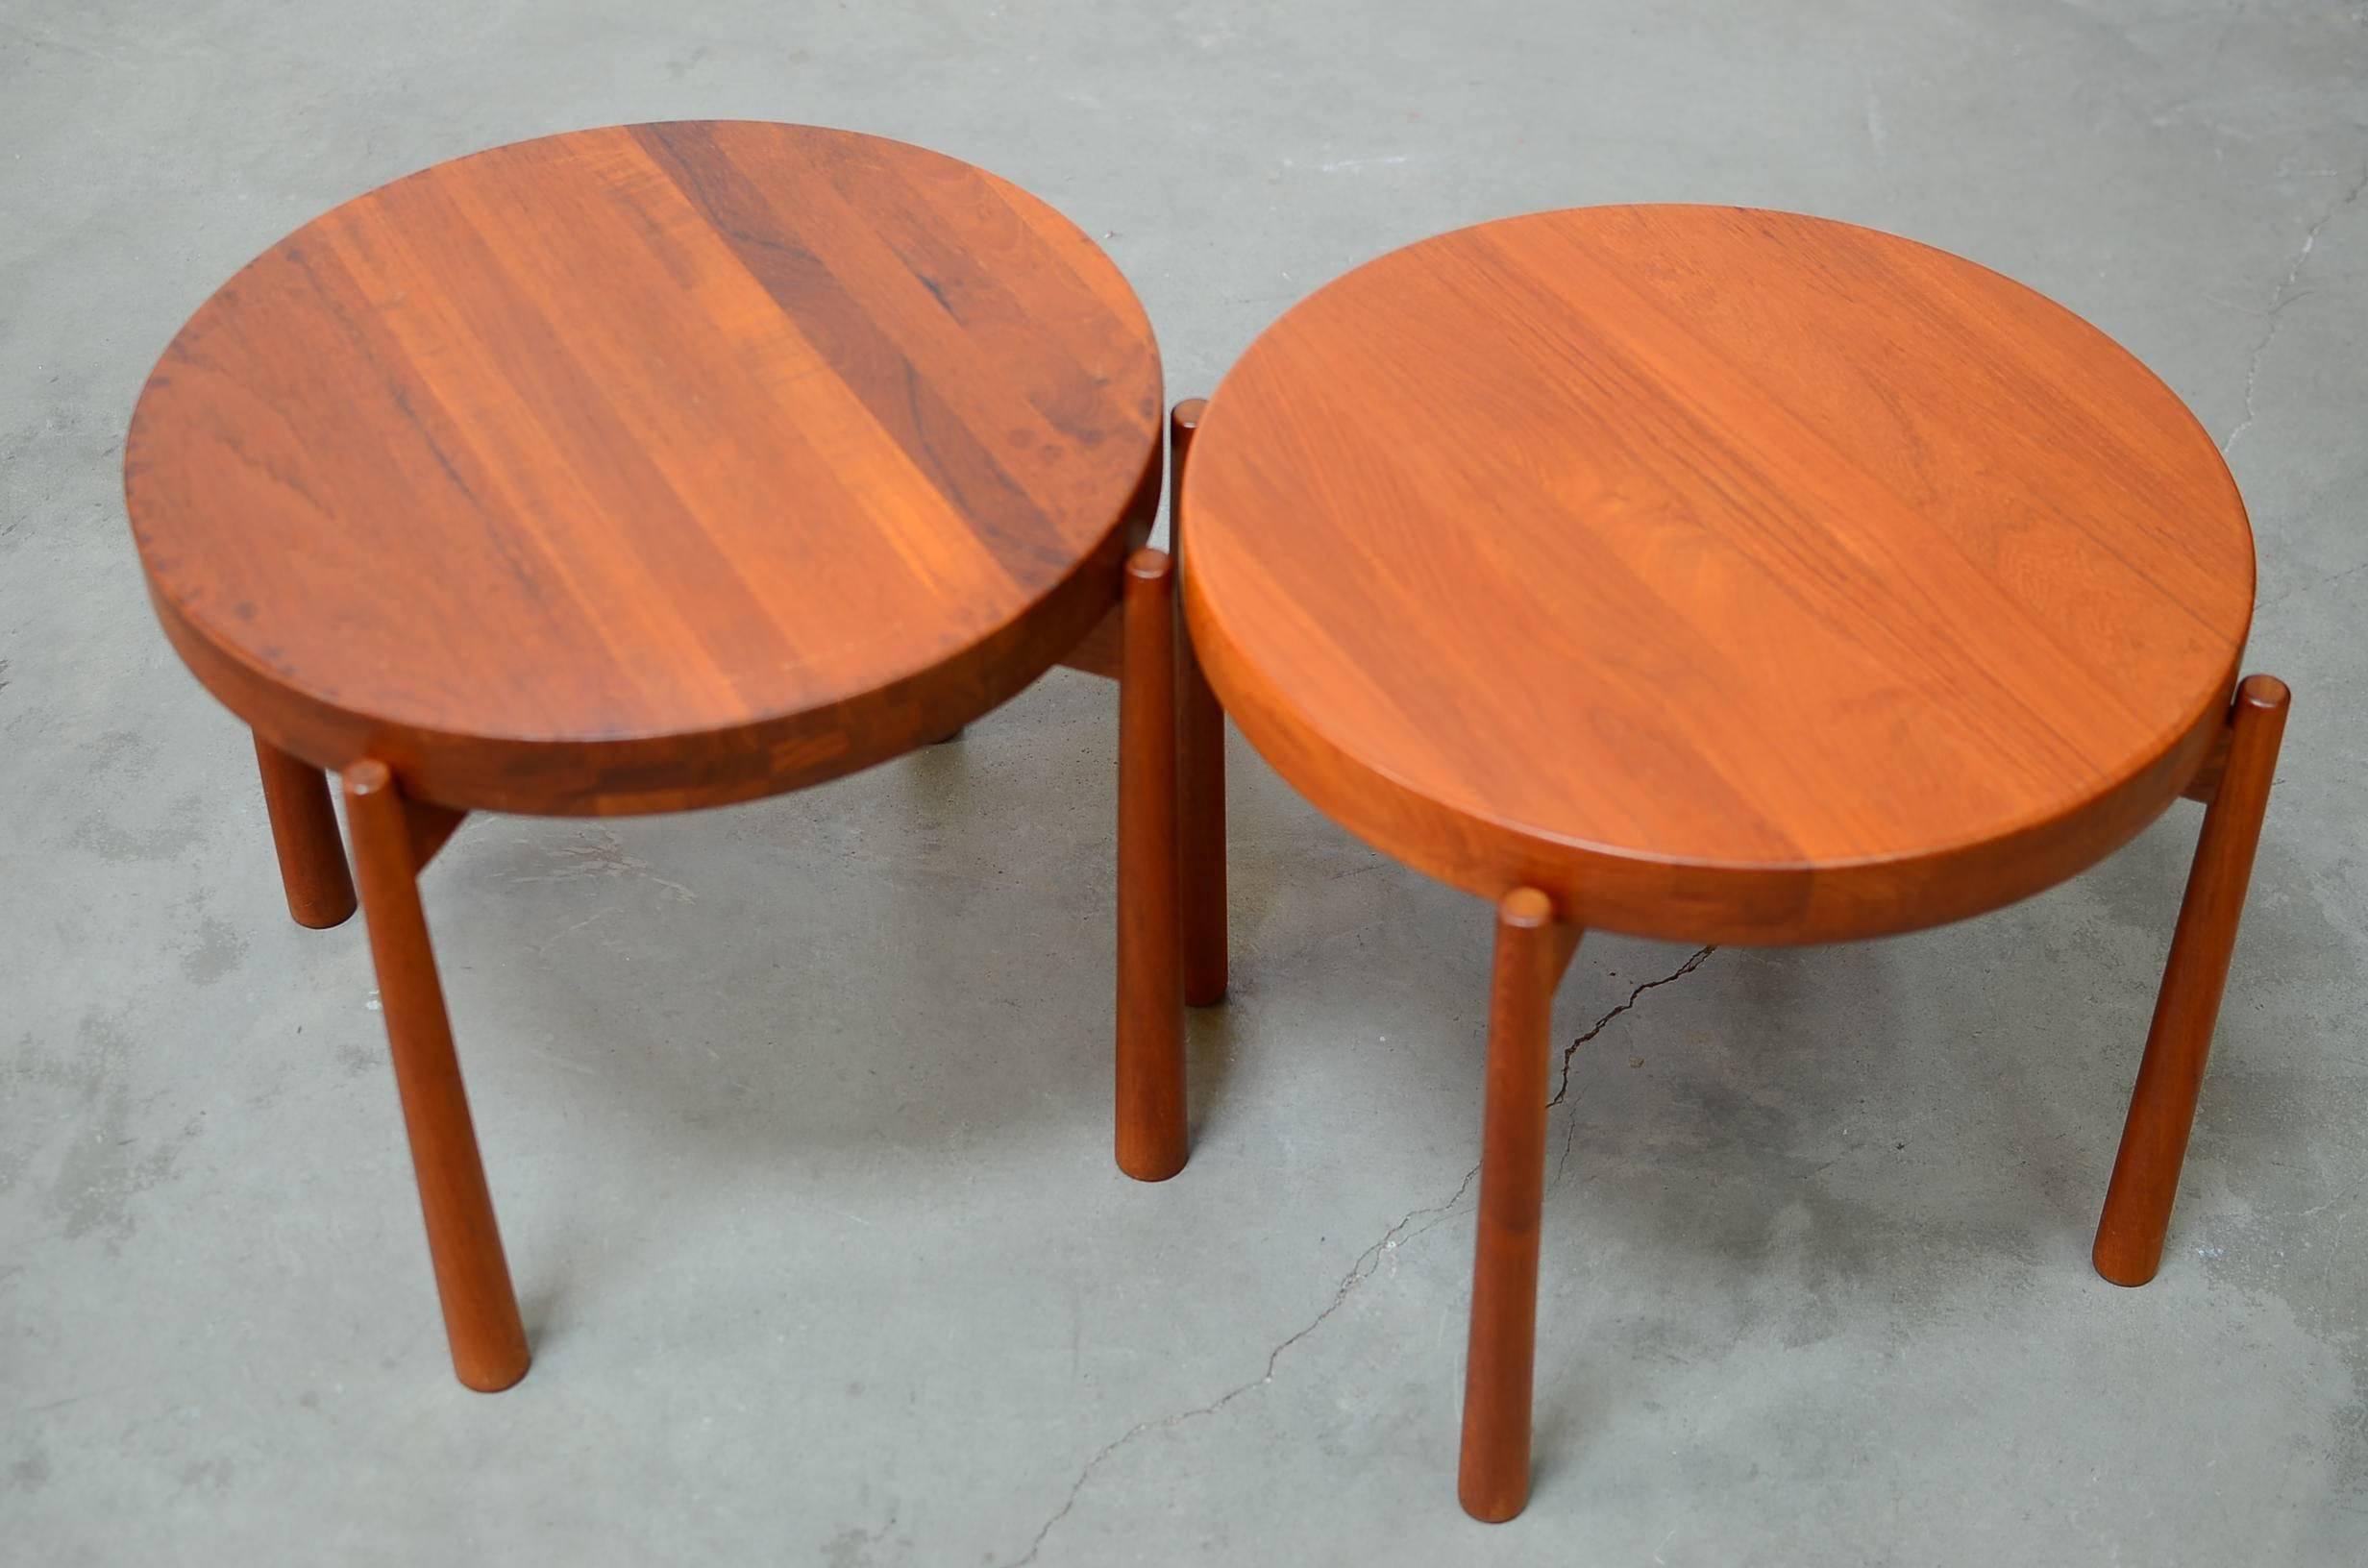 Scandinavian Modern Solid Teak Side Tables in the style of Jens Quistgaard for Dux For Sale